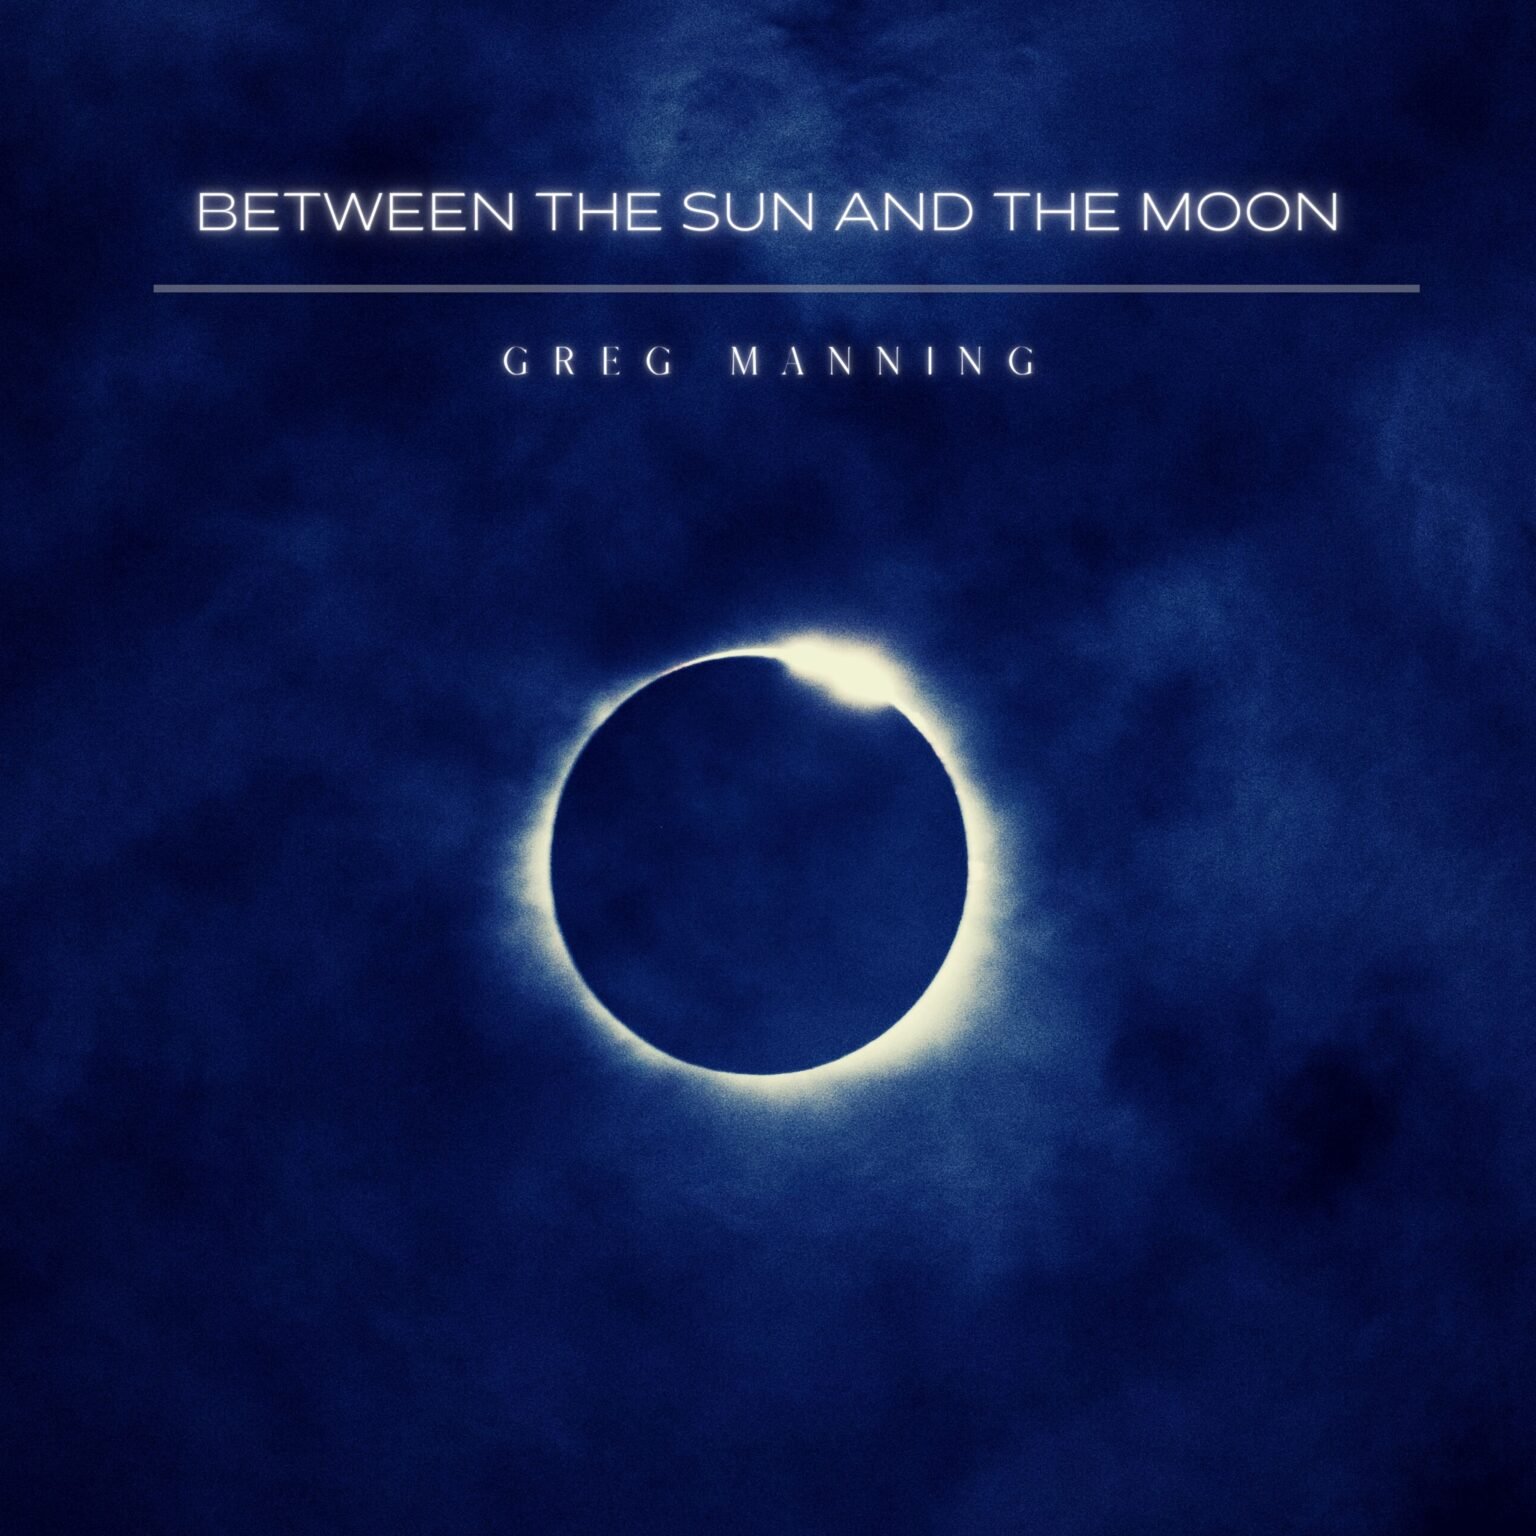 Between-the-sun-and-the-moon-cd_cover_3500-2-1536x1536.jpg